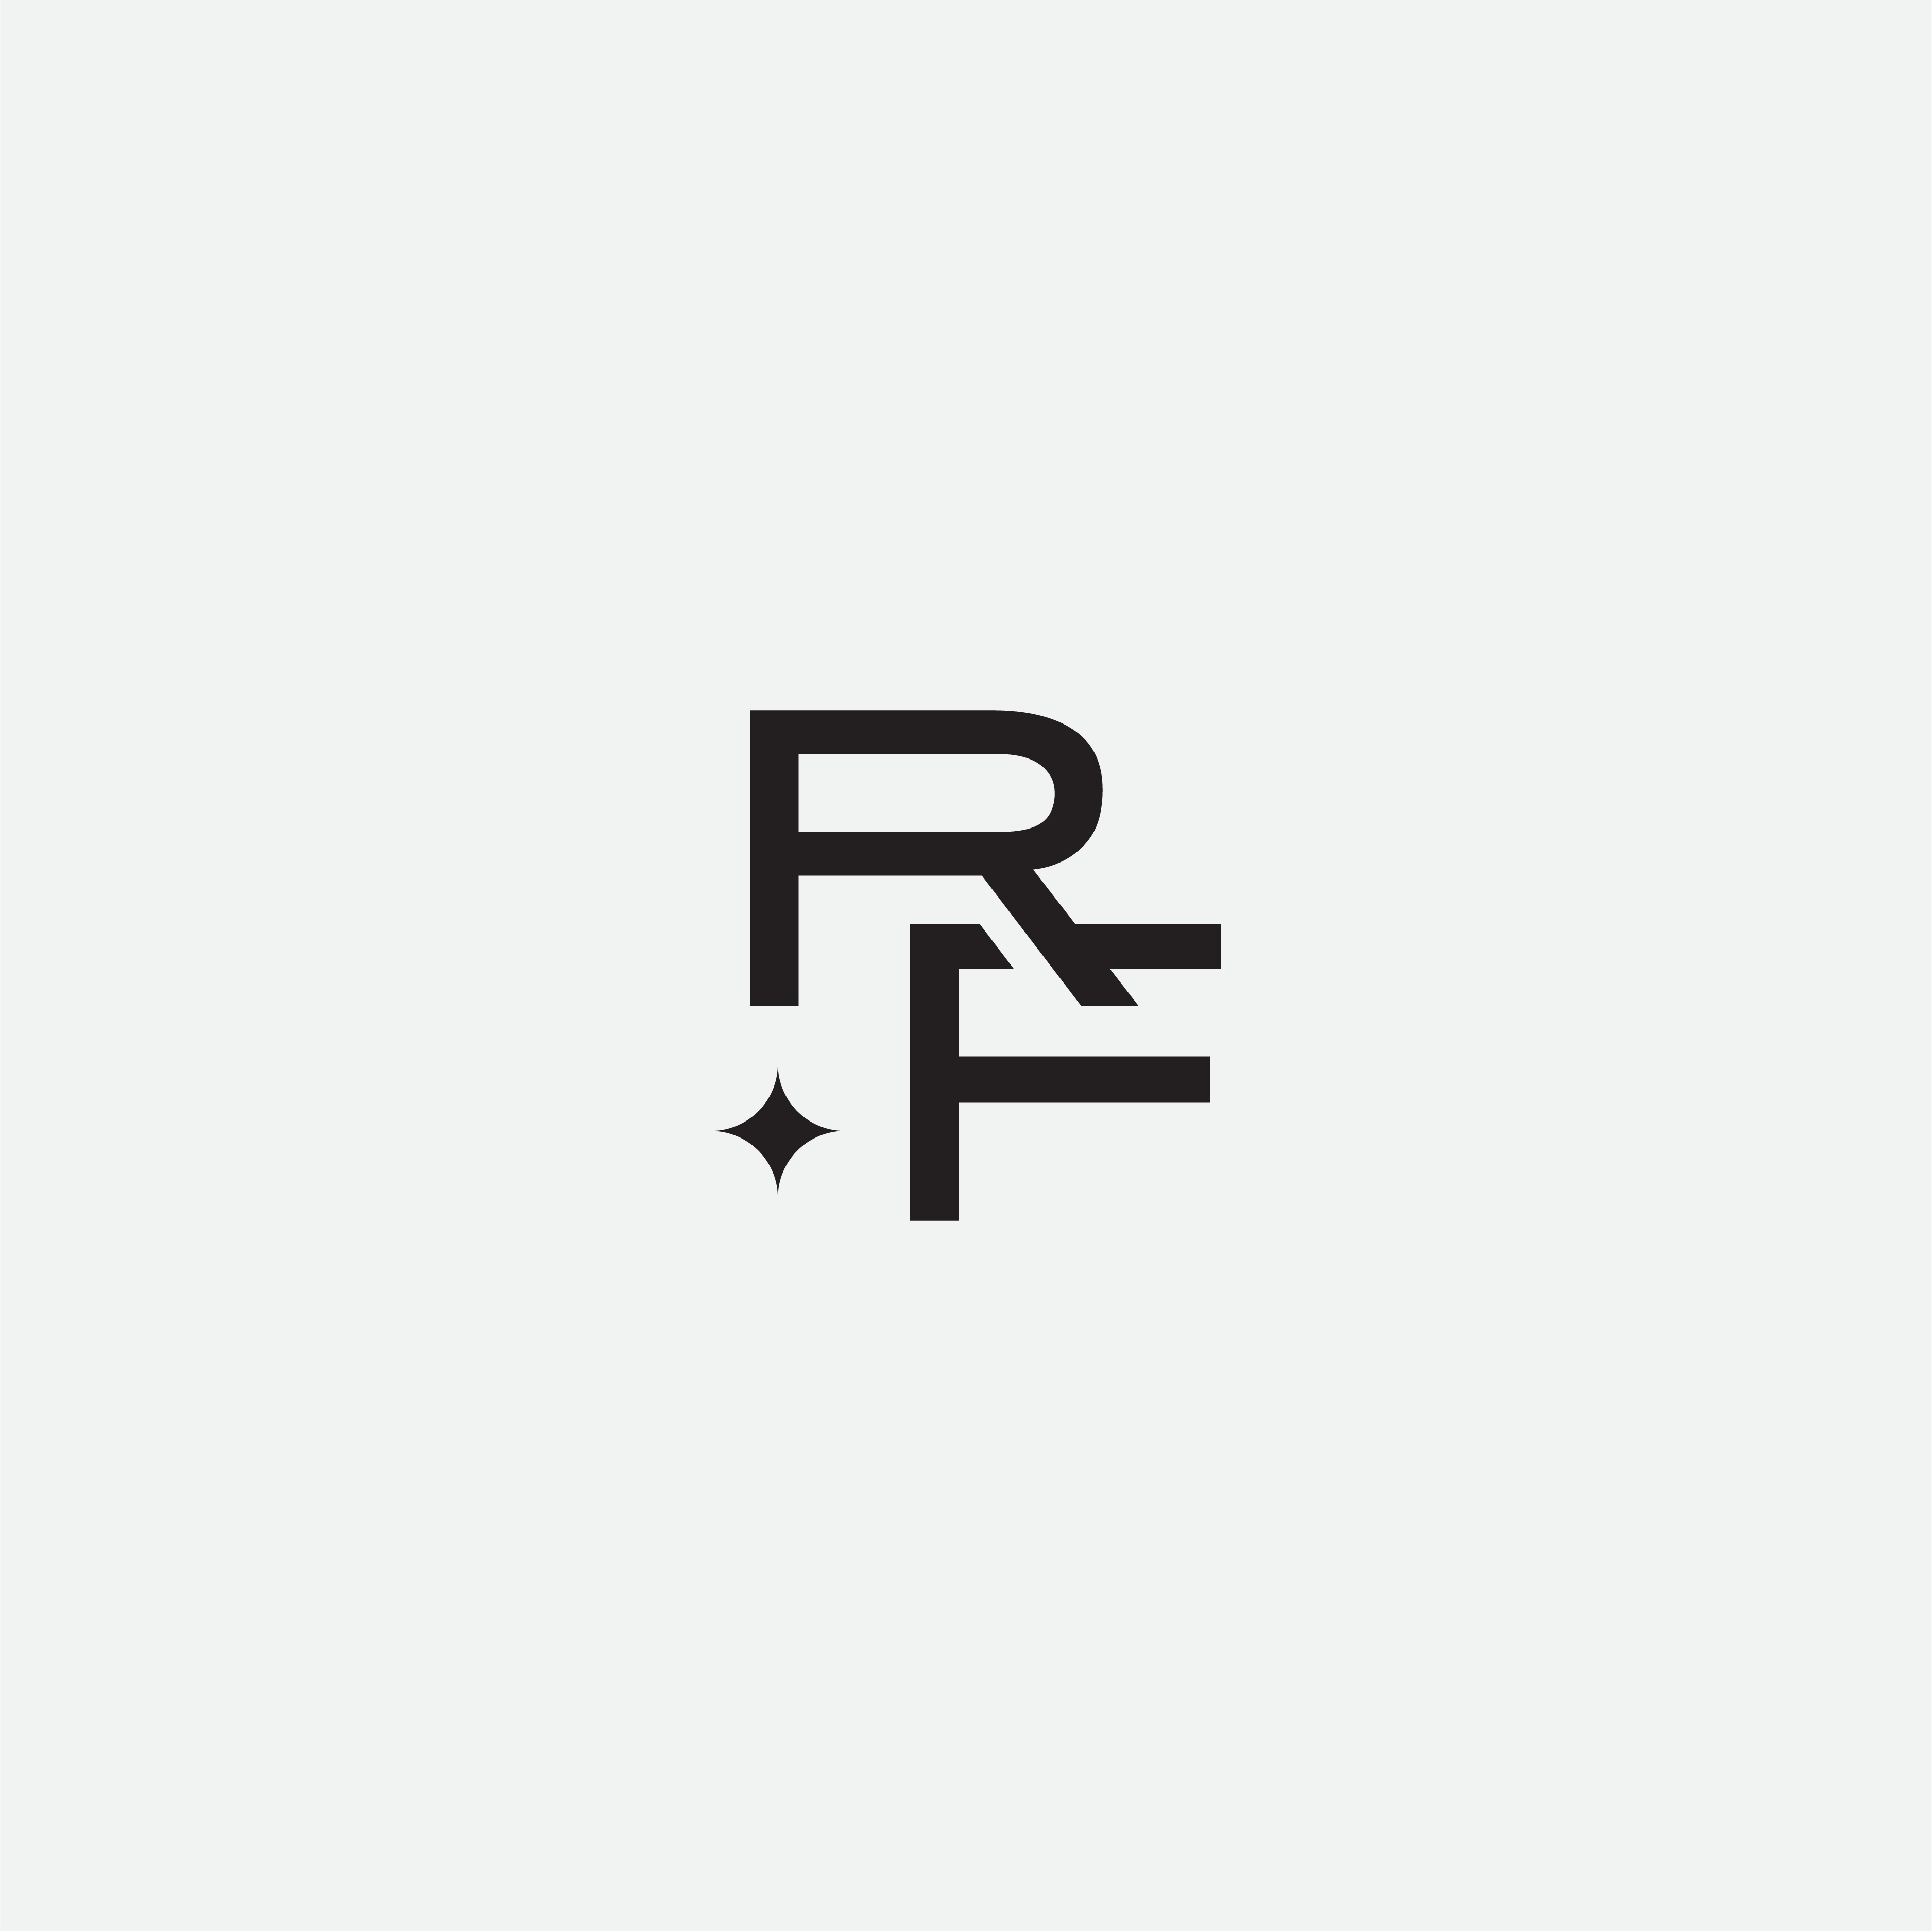 Rockie Fresh Monogram logo design by logo designer Mirka Studios for your inspiration and for the worlds largest logo competition